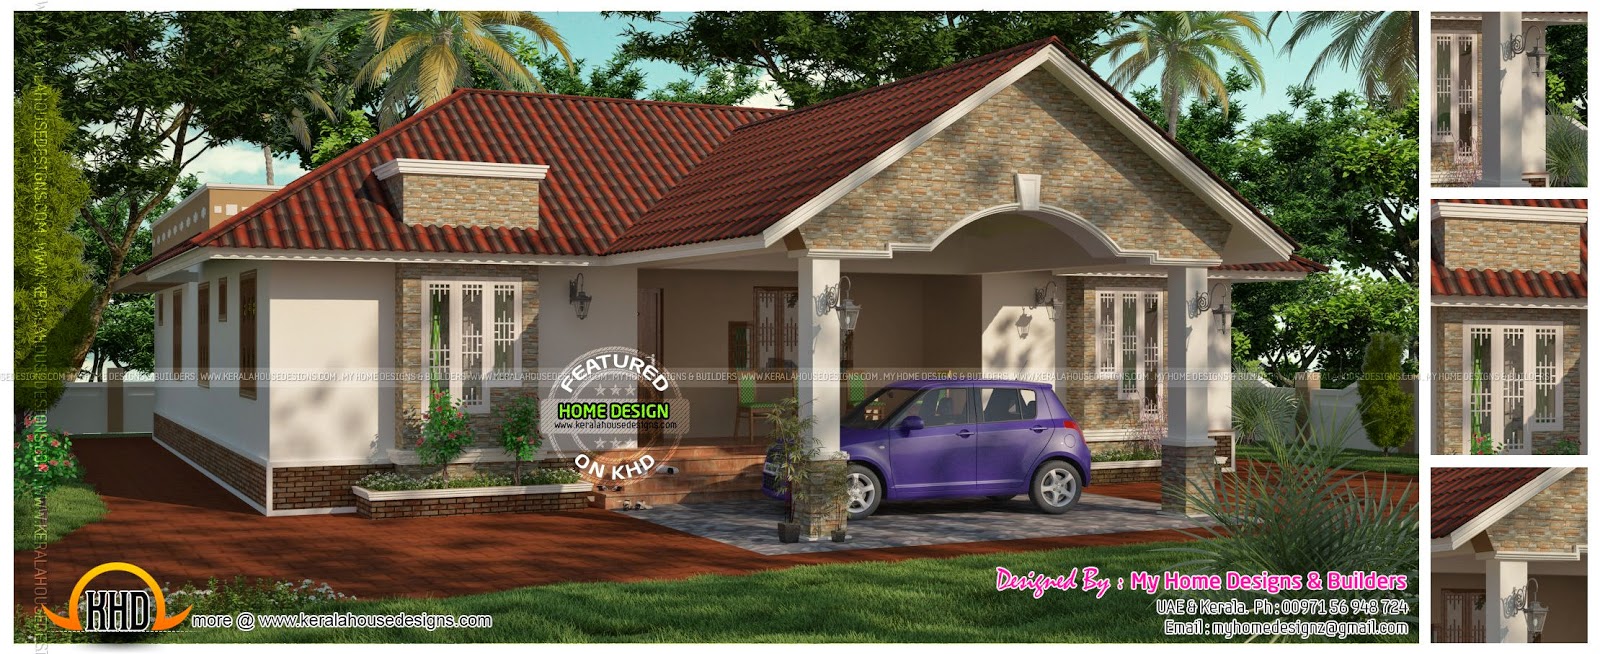 3 bedroom 2 attached one floor house - Kerala home design ...